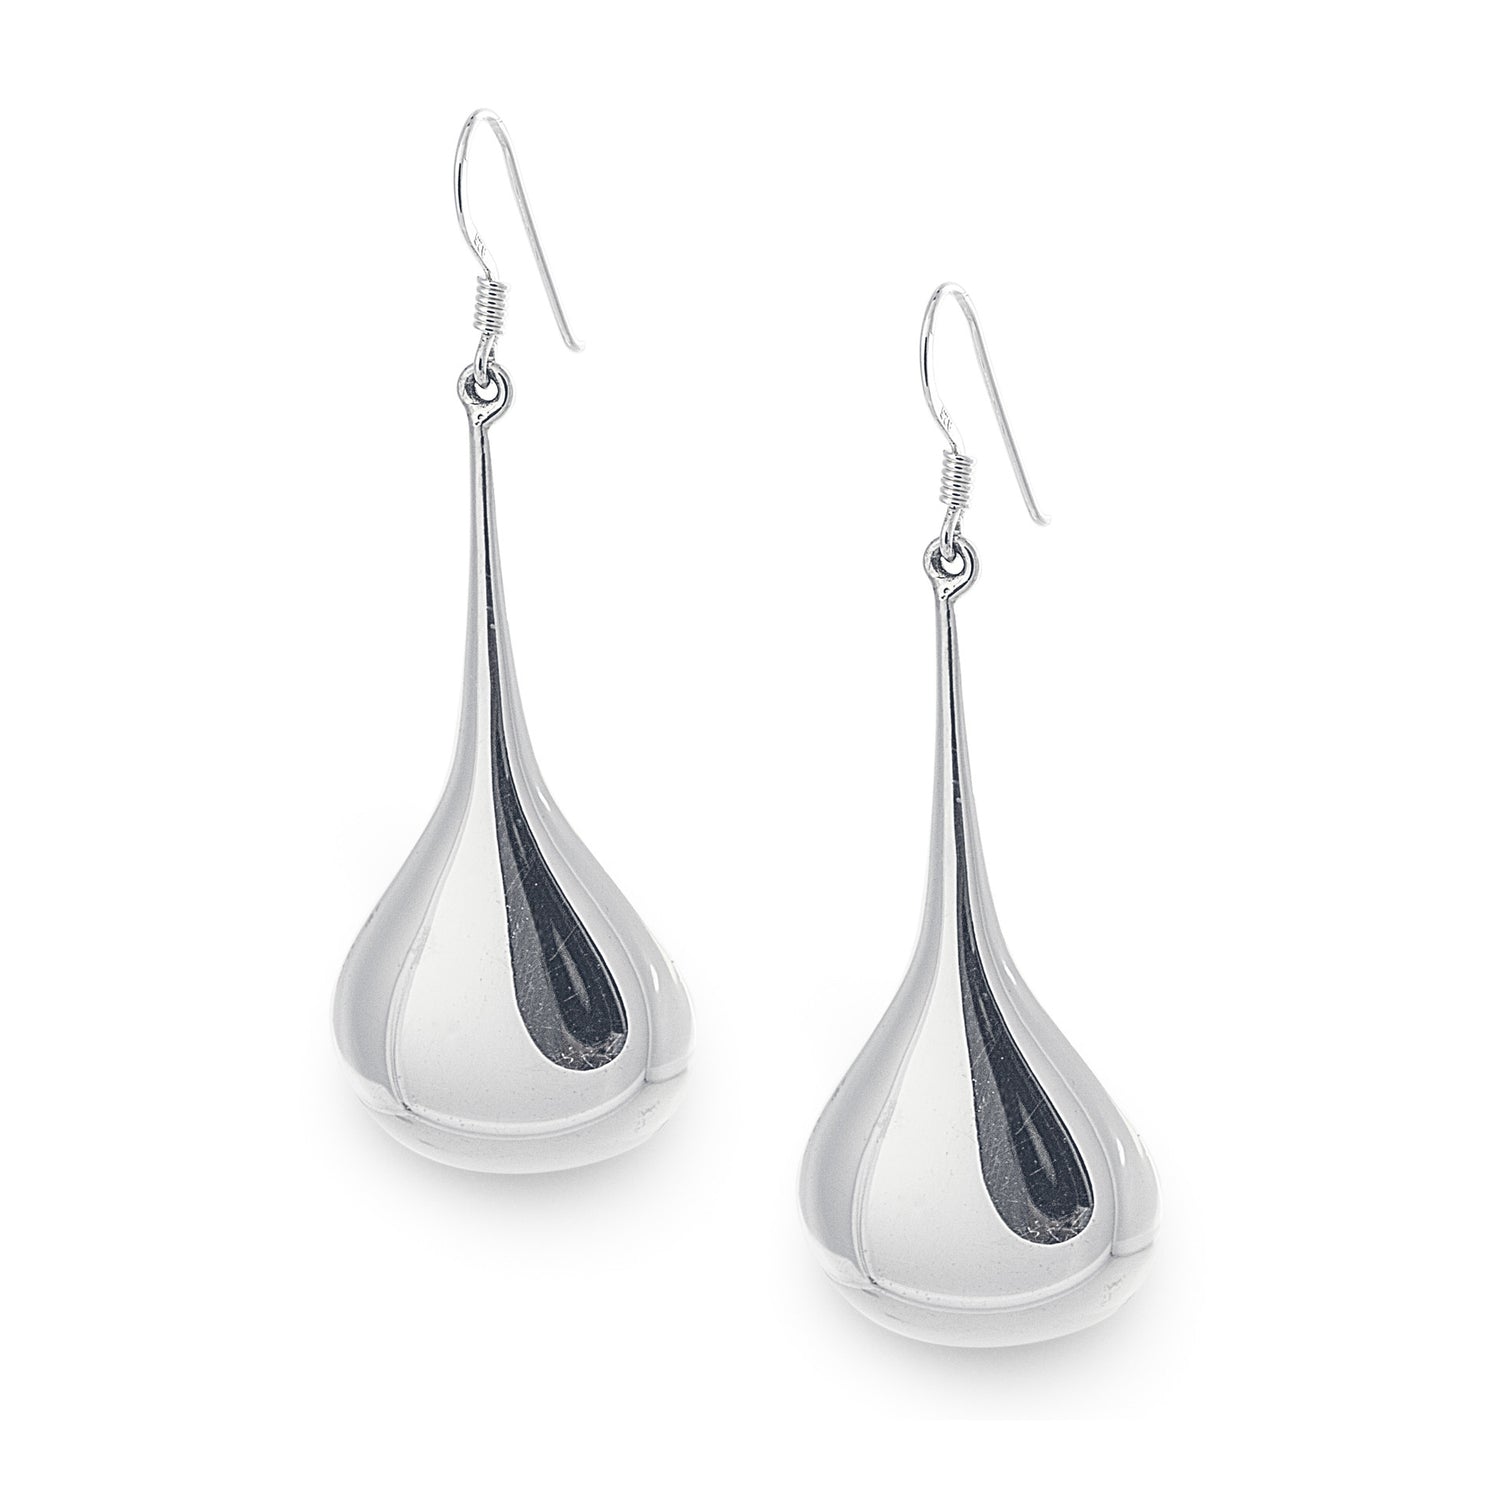 The Tanti Jeannie Earrings are modern French style earrings in 925 sterling silver with a large tear-shaped drop on an ear wire. Jewellery by Bellagio & Co. Worldwide shipping. Premium sterling silver jewellery.